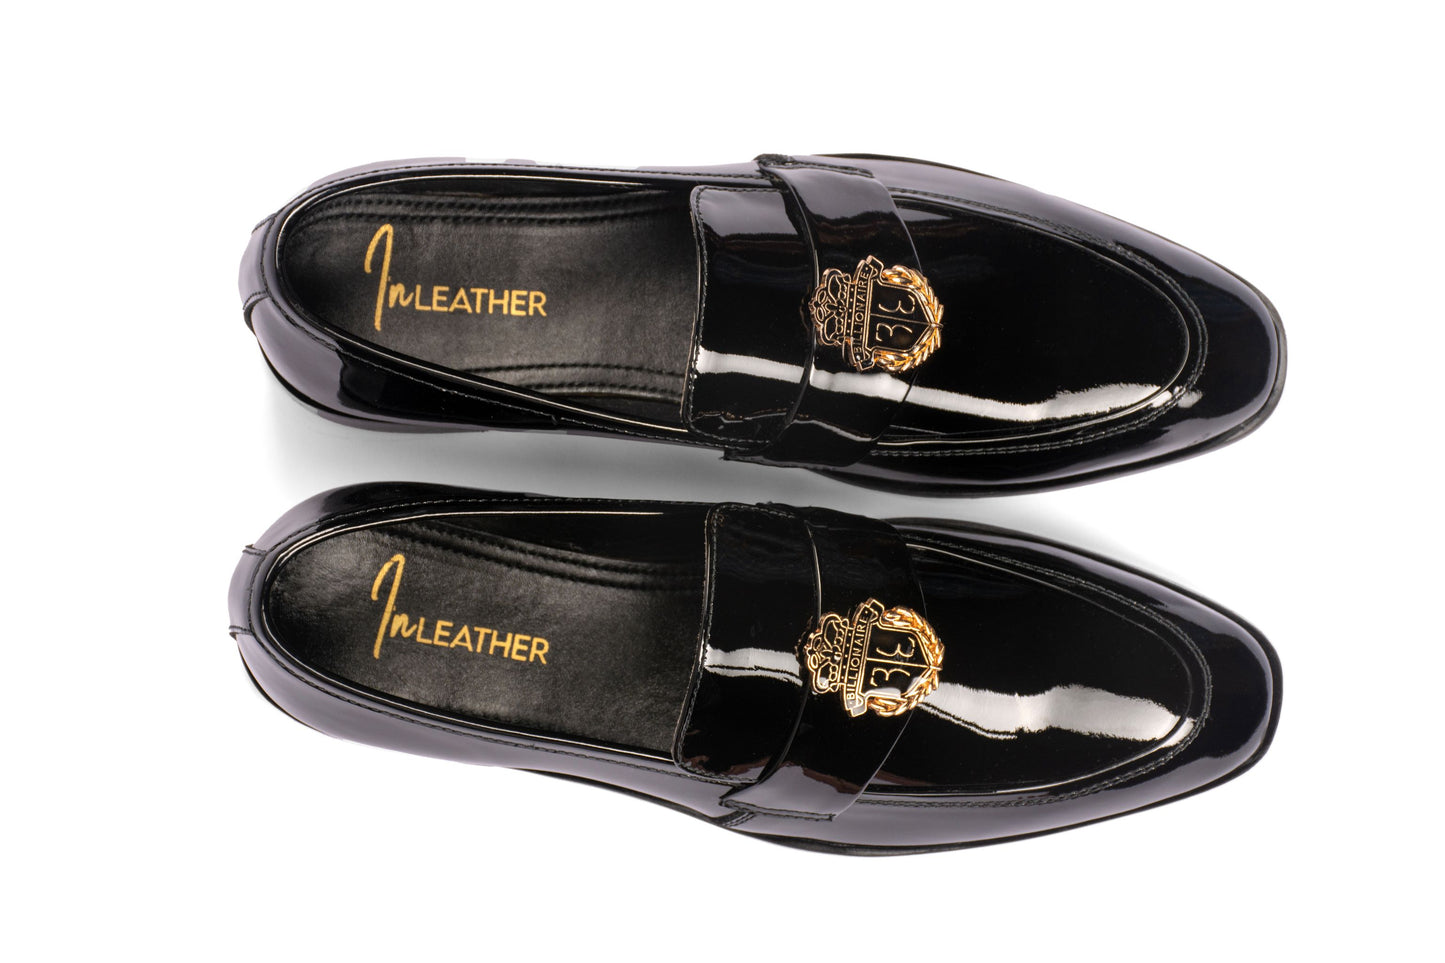 Inleather Loafers 009